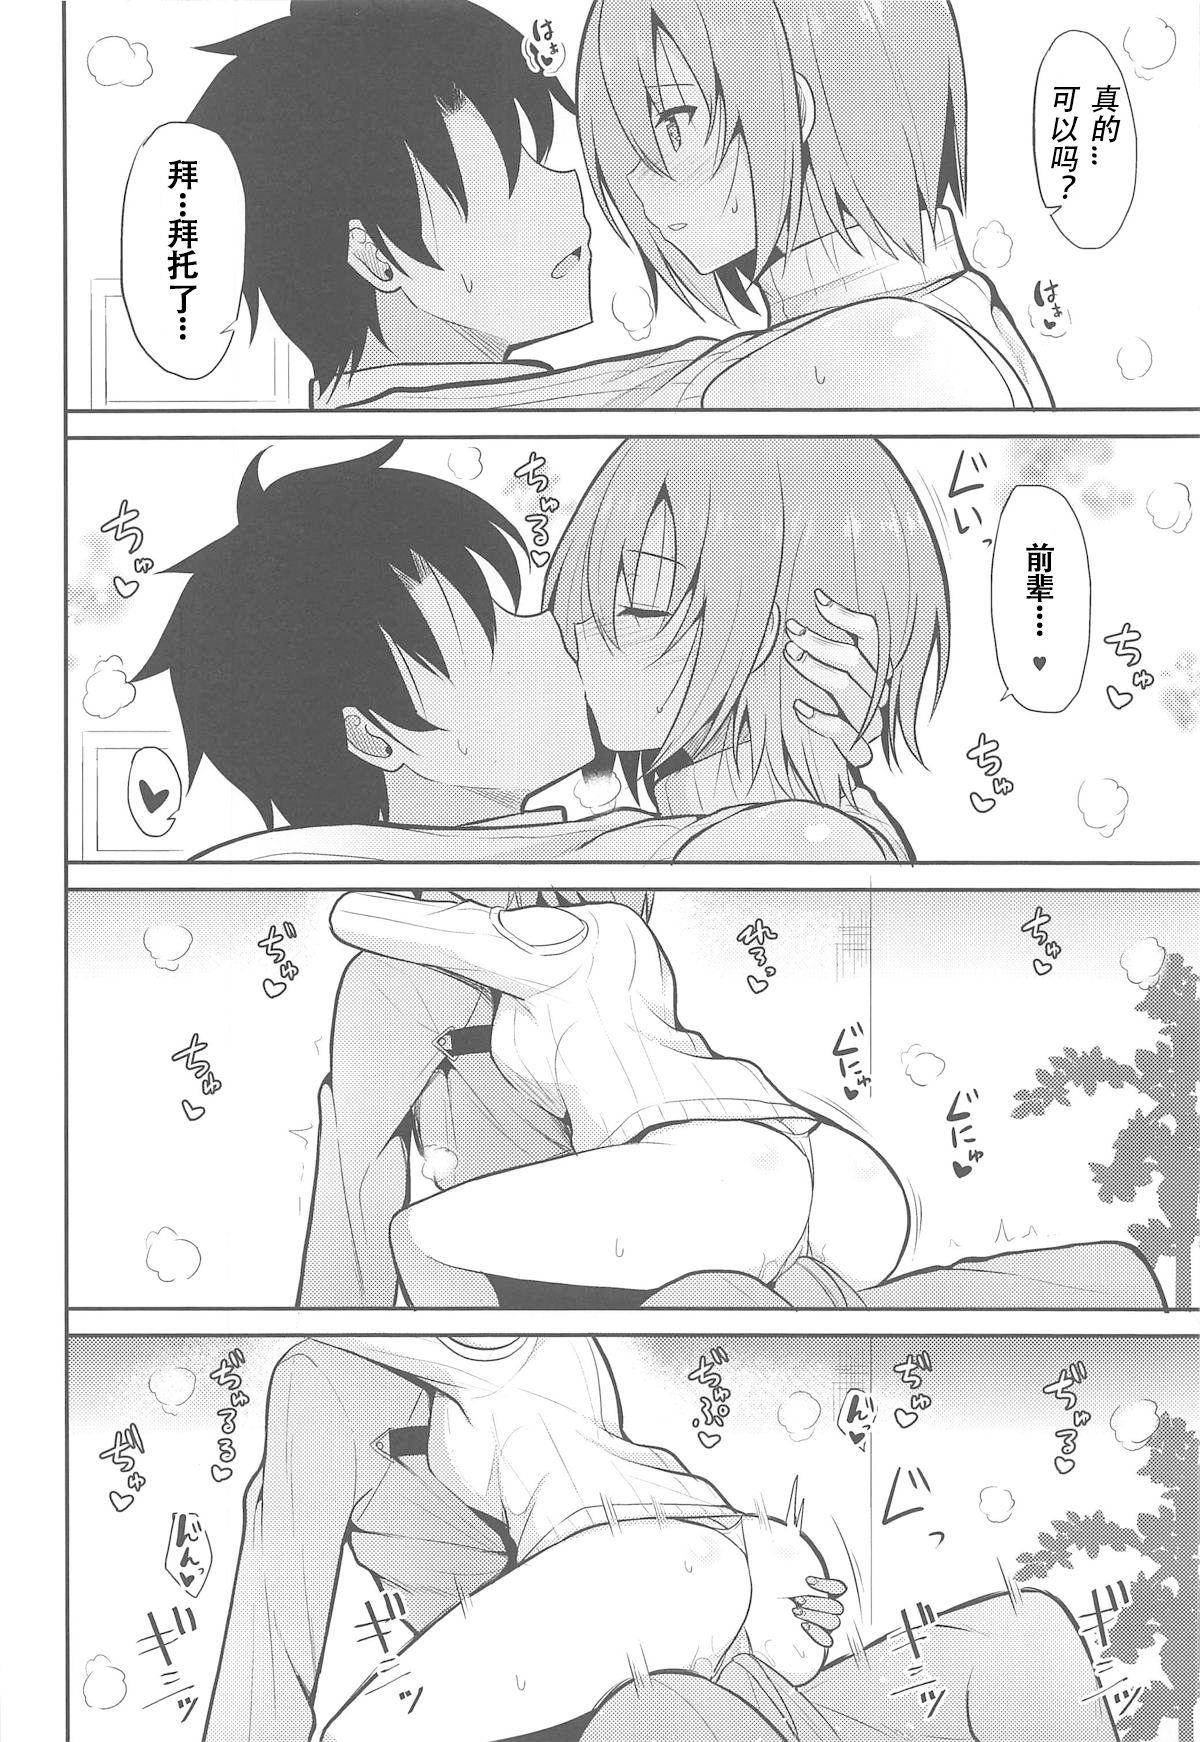 Women Sucking Amai Marshmallow - Fate grand order Amatures Gone Wild - Page 10